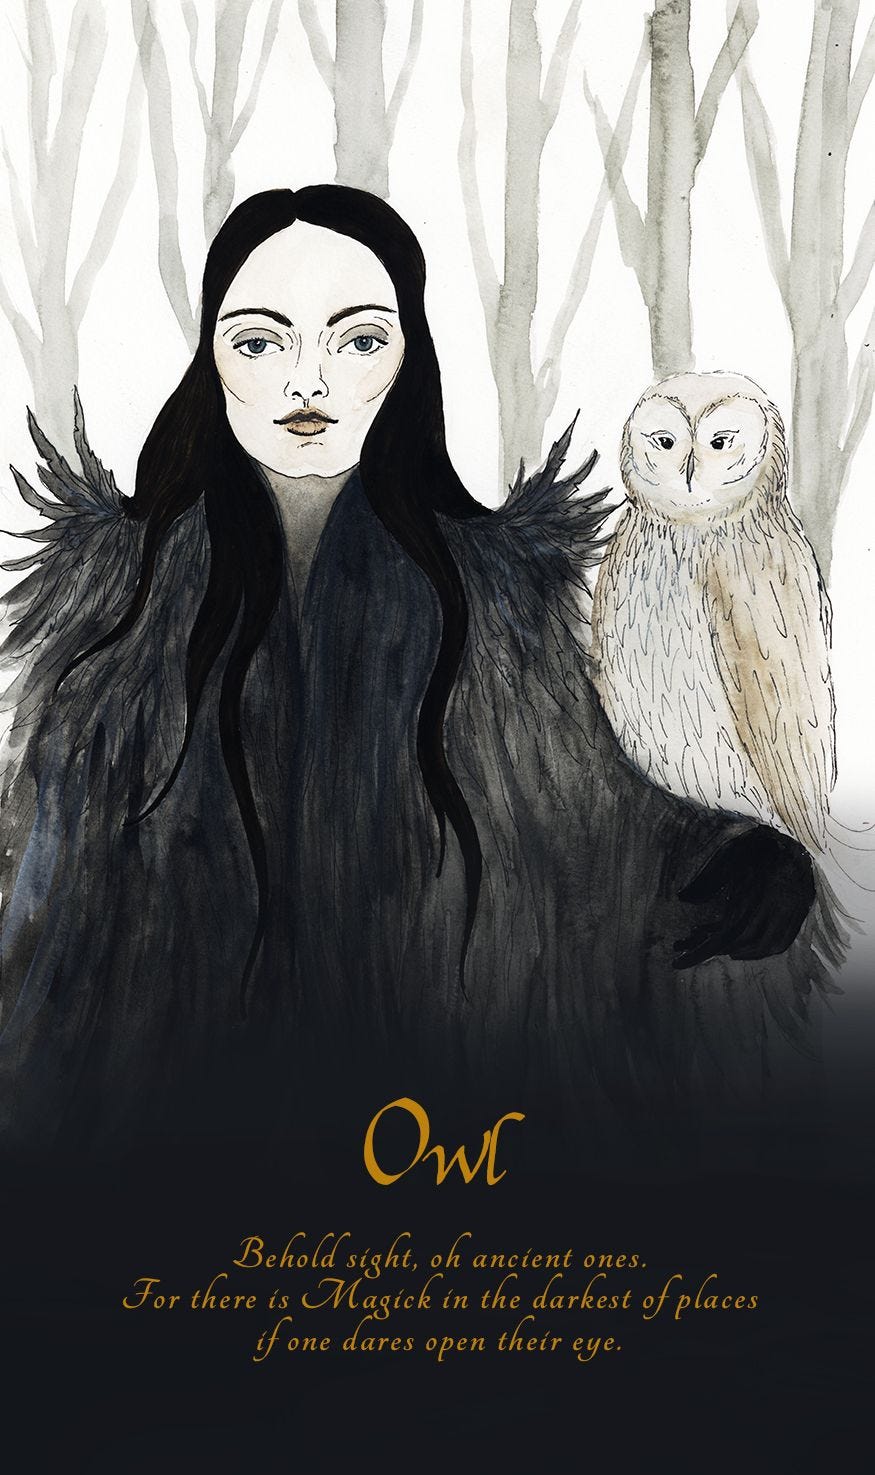 The Season of the Witch: Samhain Oracle Card depicting a white woman with long black hair and a black fur coat with a snowy white owl perched on her shoulder in a winter woods. The text at the bottom of the card says, “Behold sight, oh ancient ones. For there is magic in the darkest places if one dares to open their eyes.”